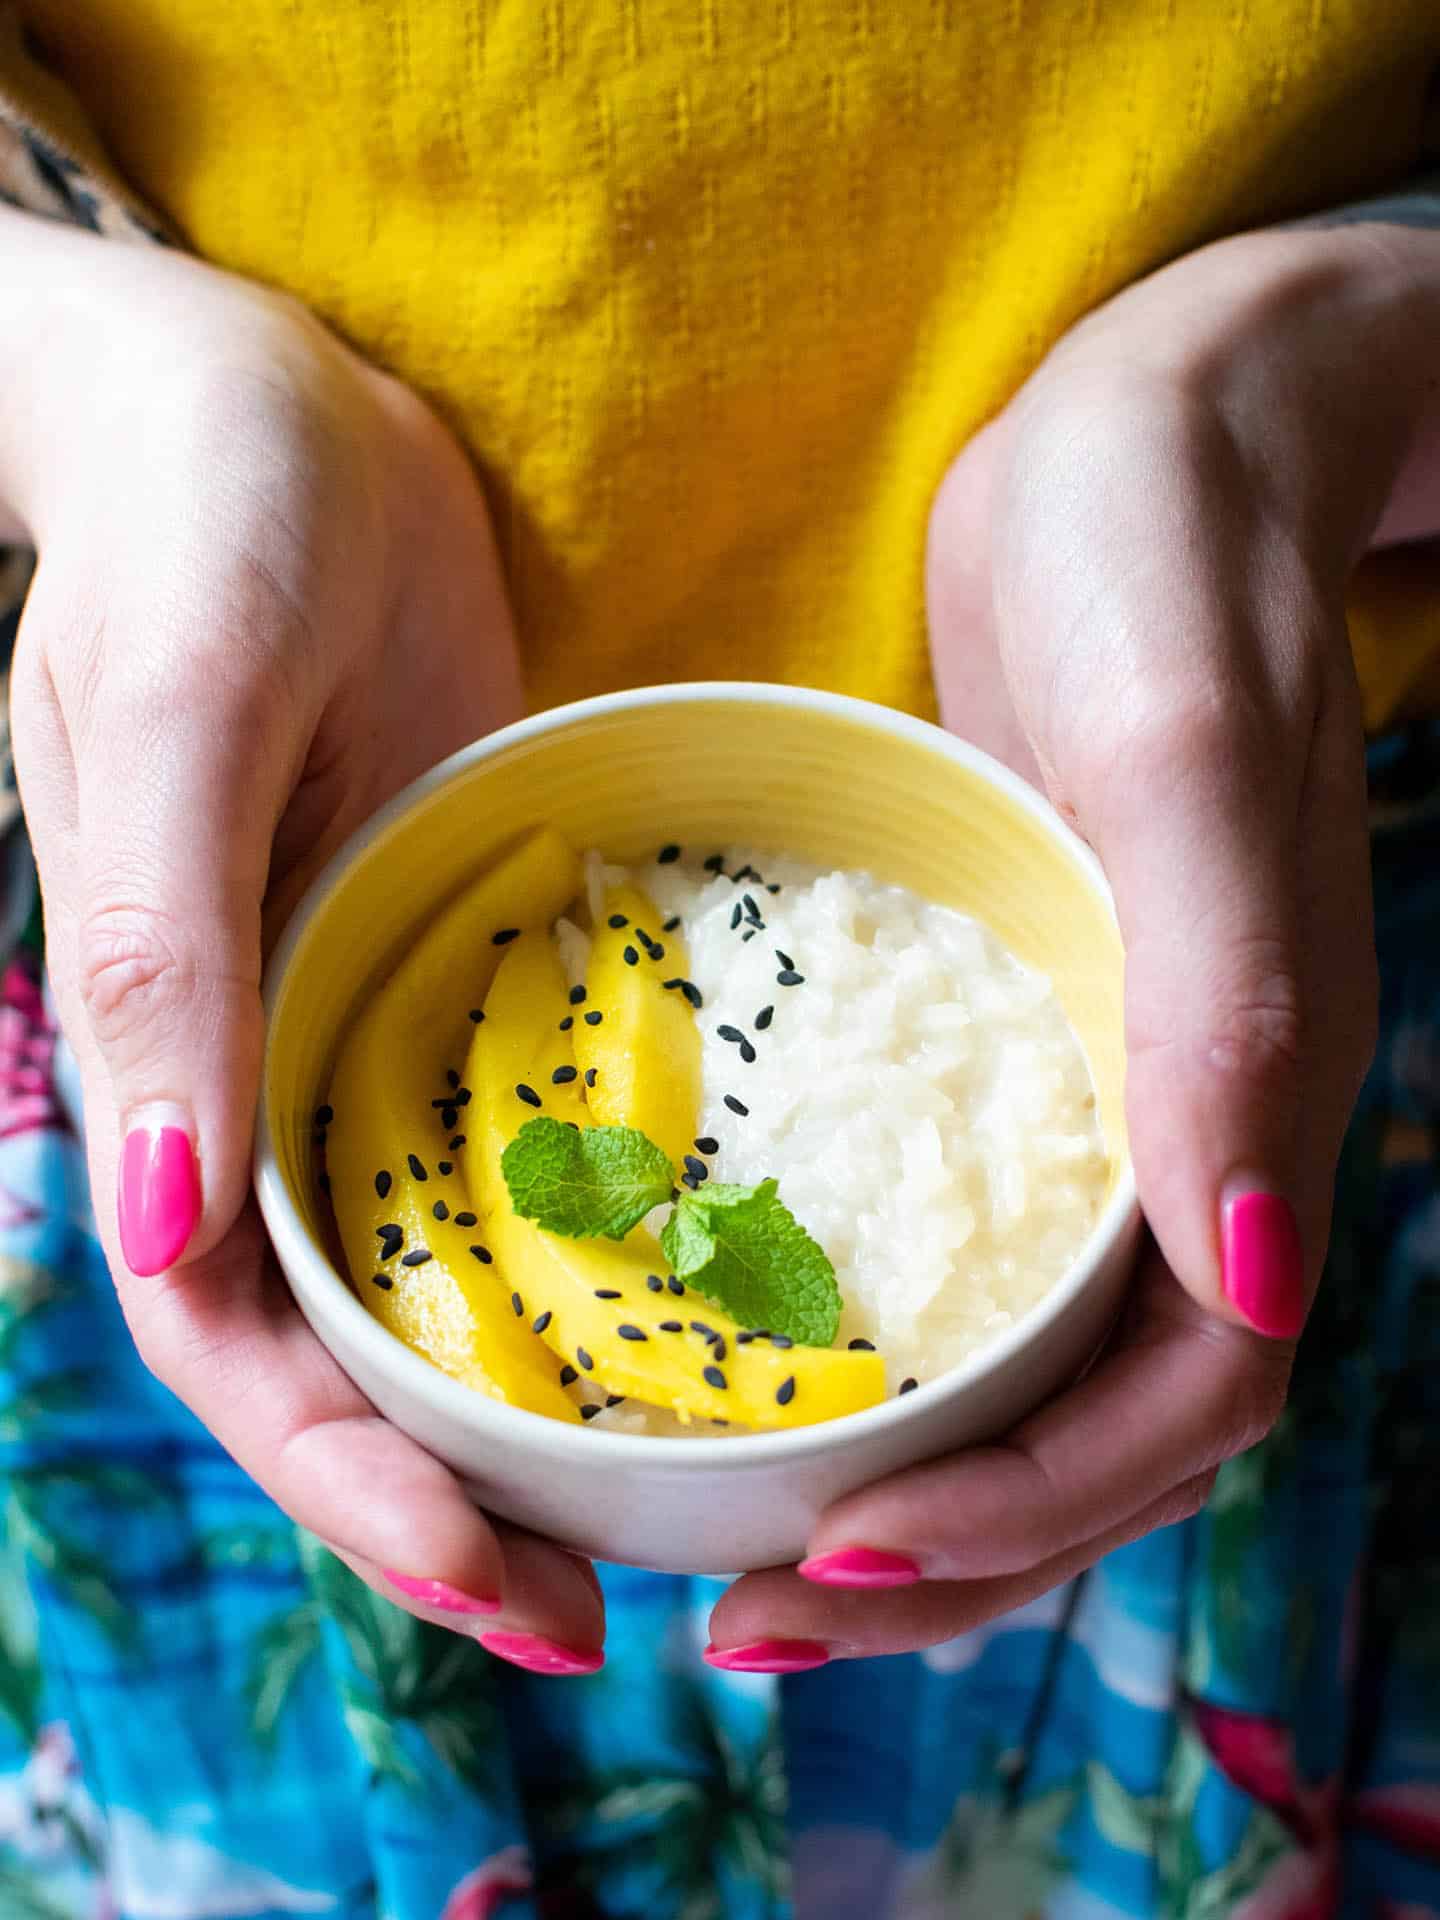 A pair of hands with painted pink nails, holding a bowl of mango and sticky coconut rice.